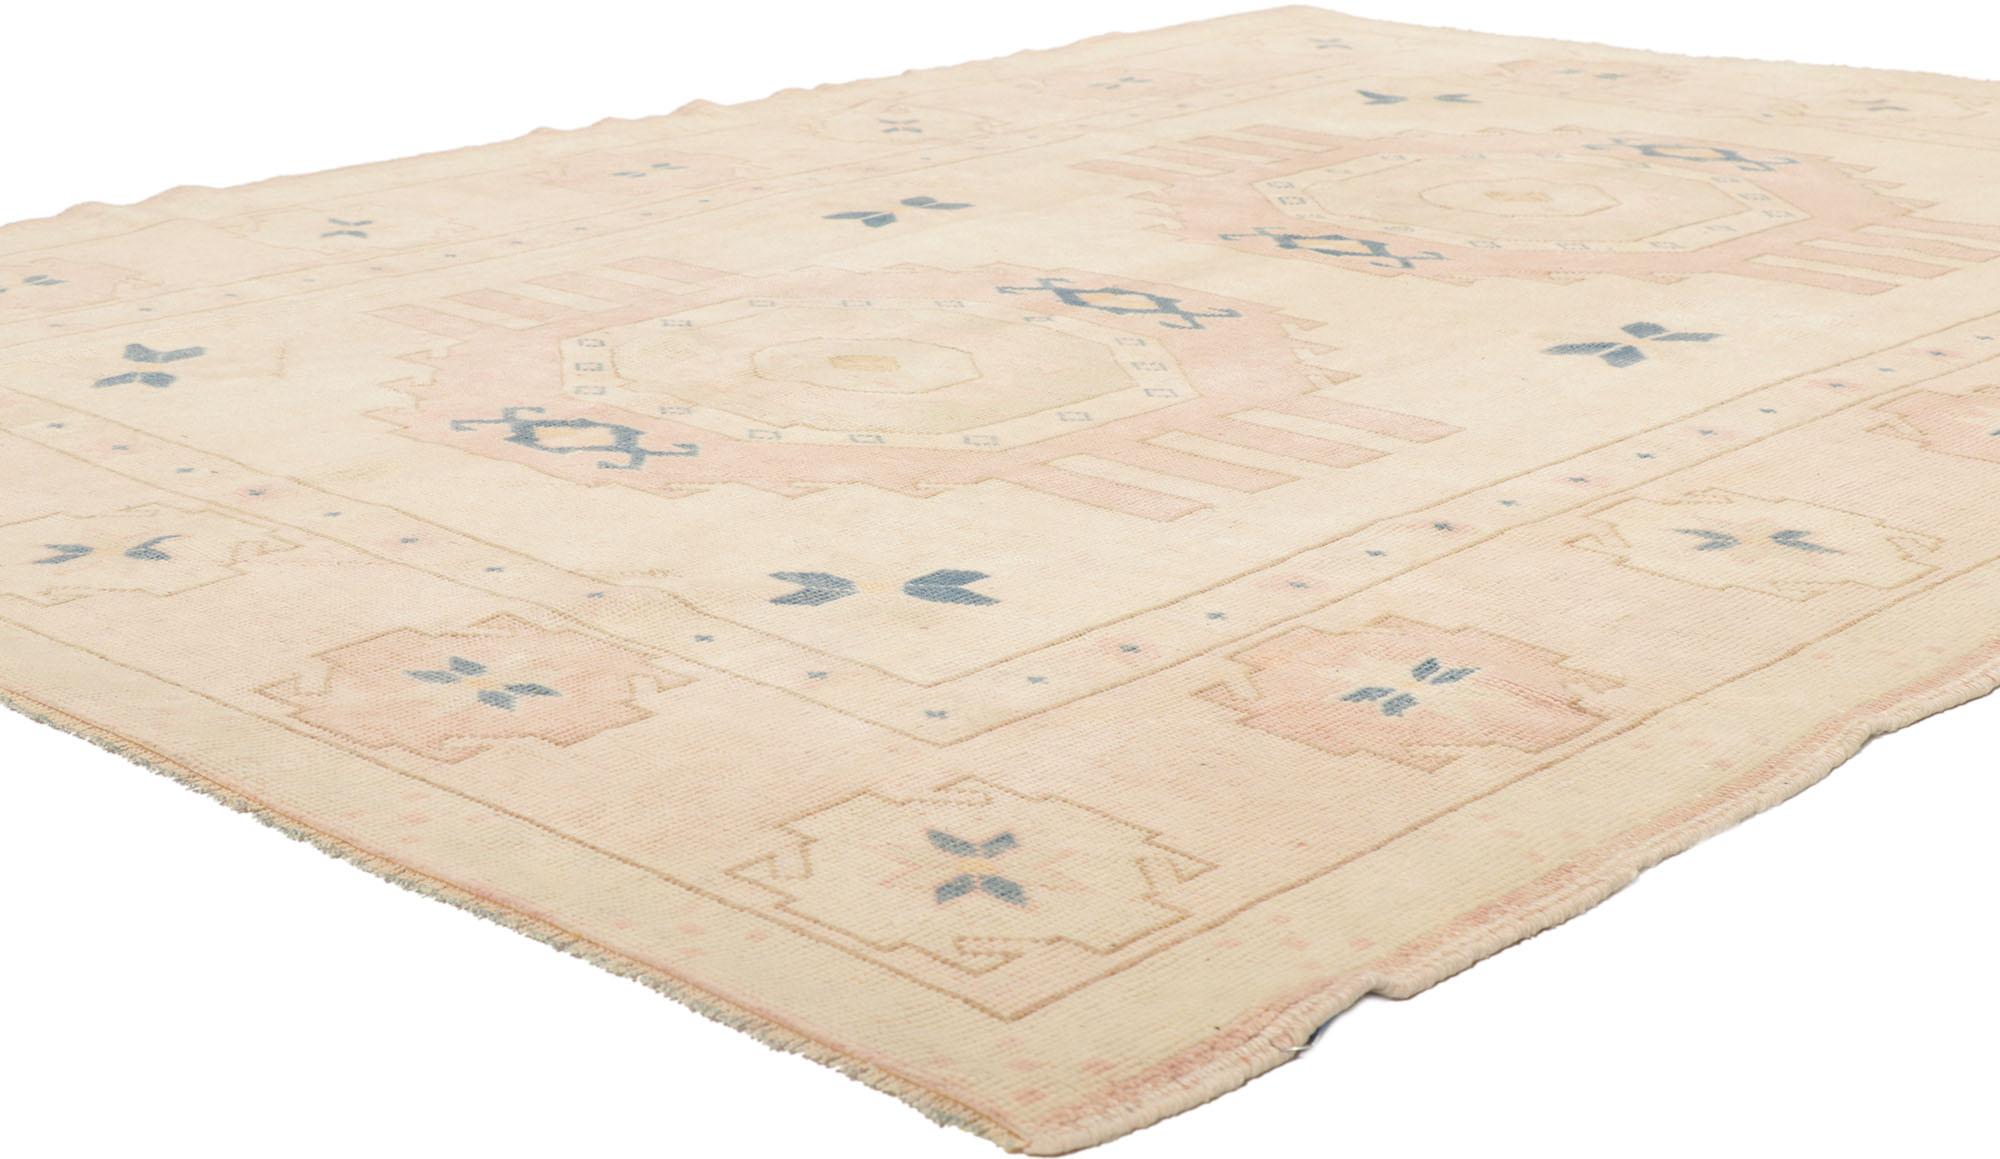 53713 Vintage Turkish Kars Oushak Rug with Modern Bohemian Style 06'00 x 08'00. Full of tiny details and an expressive tribal design, this hand-knotted wool vintage Turkish Kars rug is a captivating vision of woven beauty. The abrashed beige field